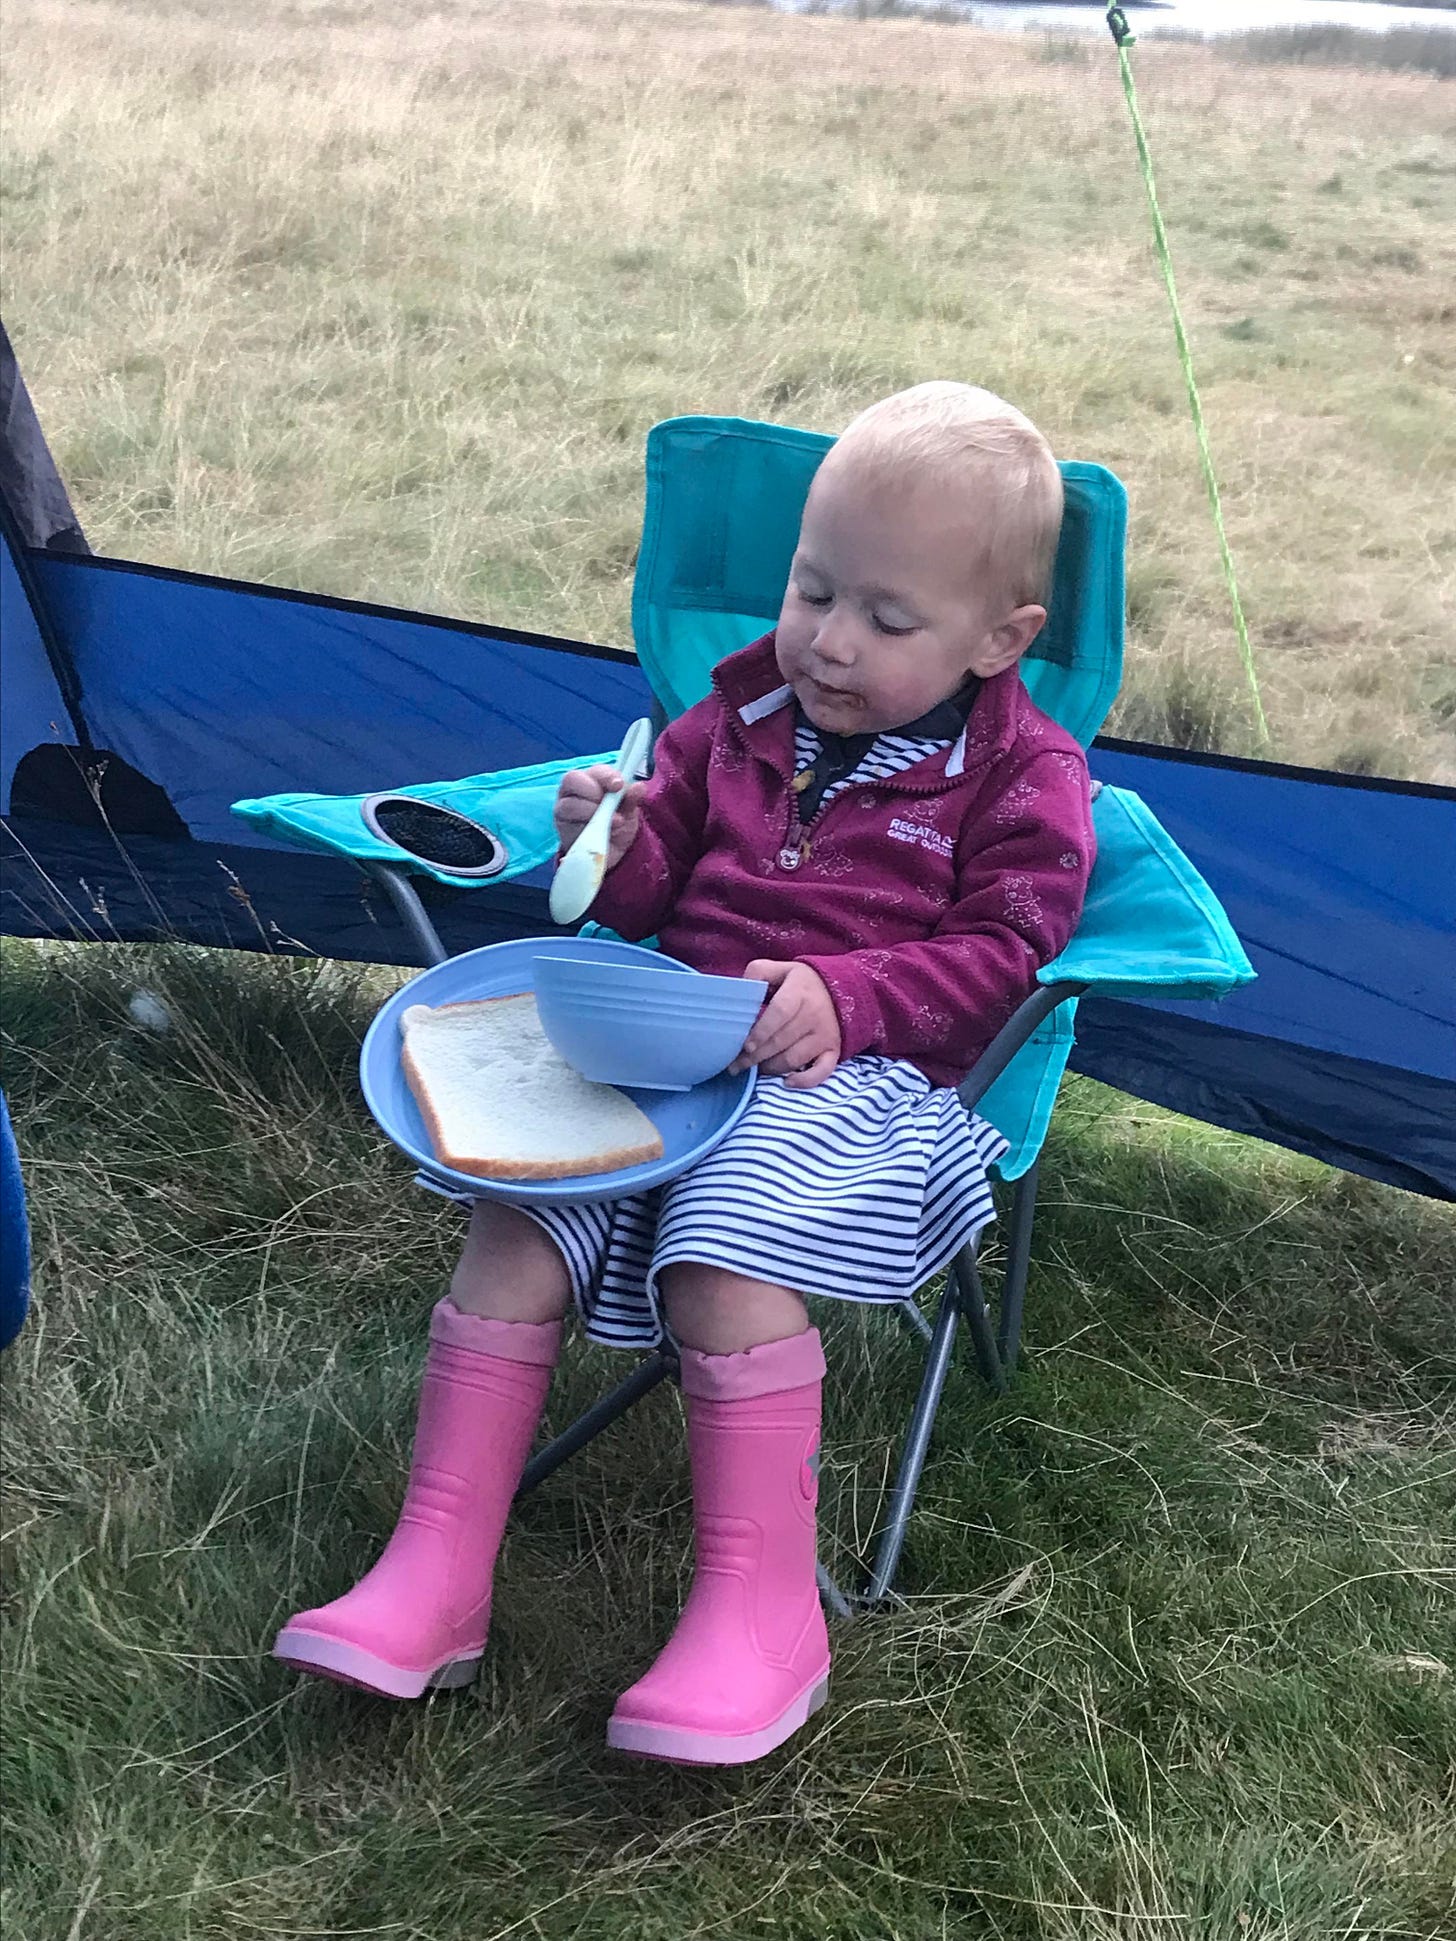 Toddler sat in a camping chair with a plate of bread, wearing pink wellies